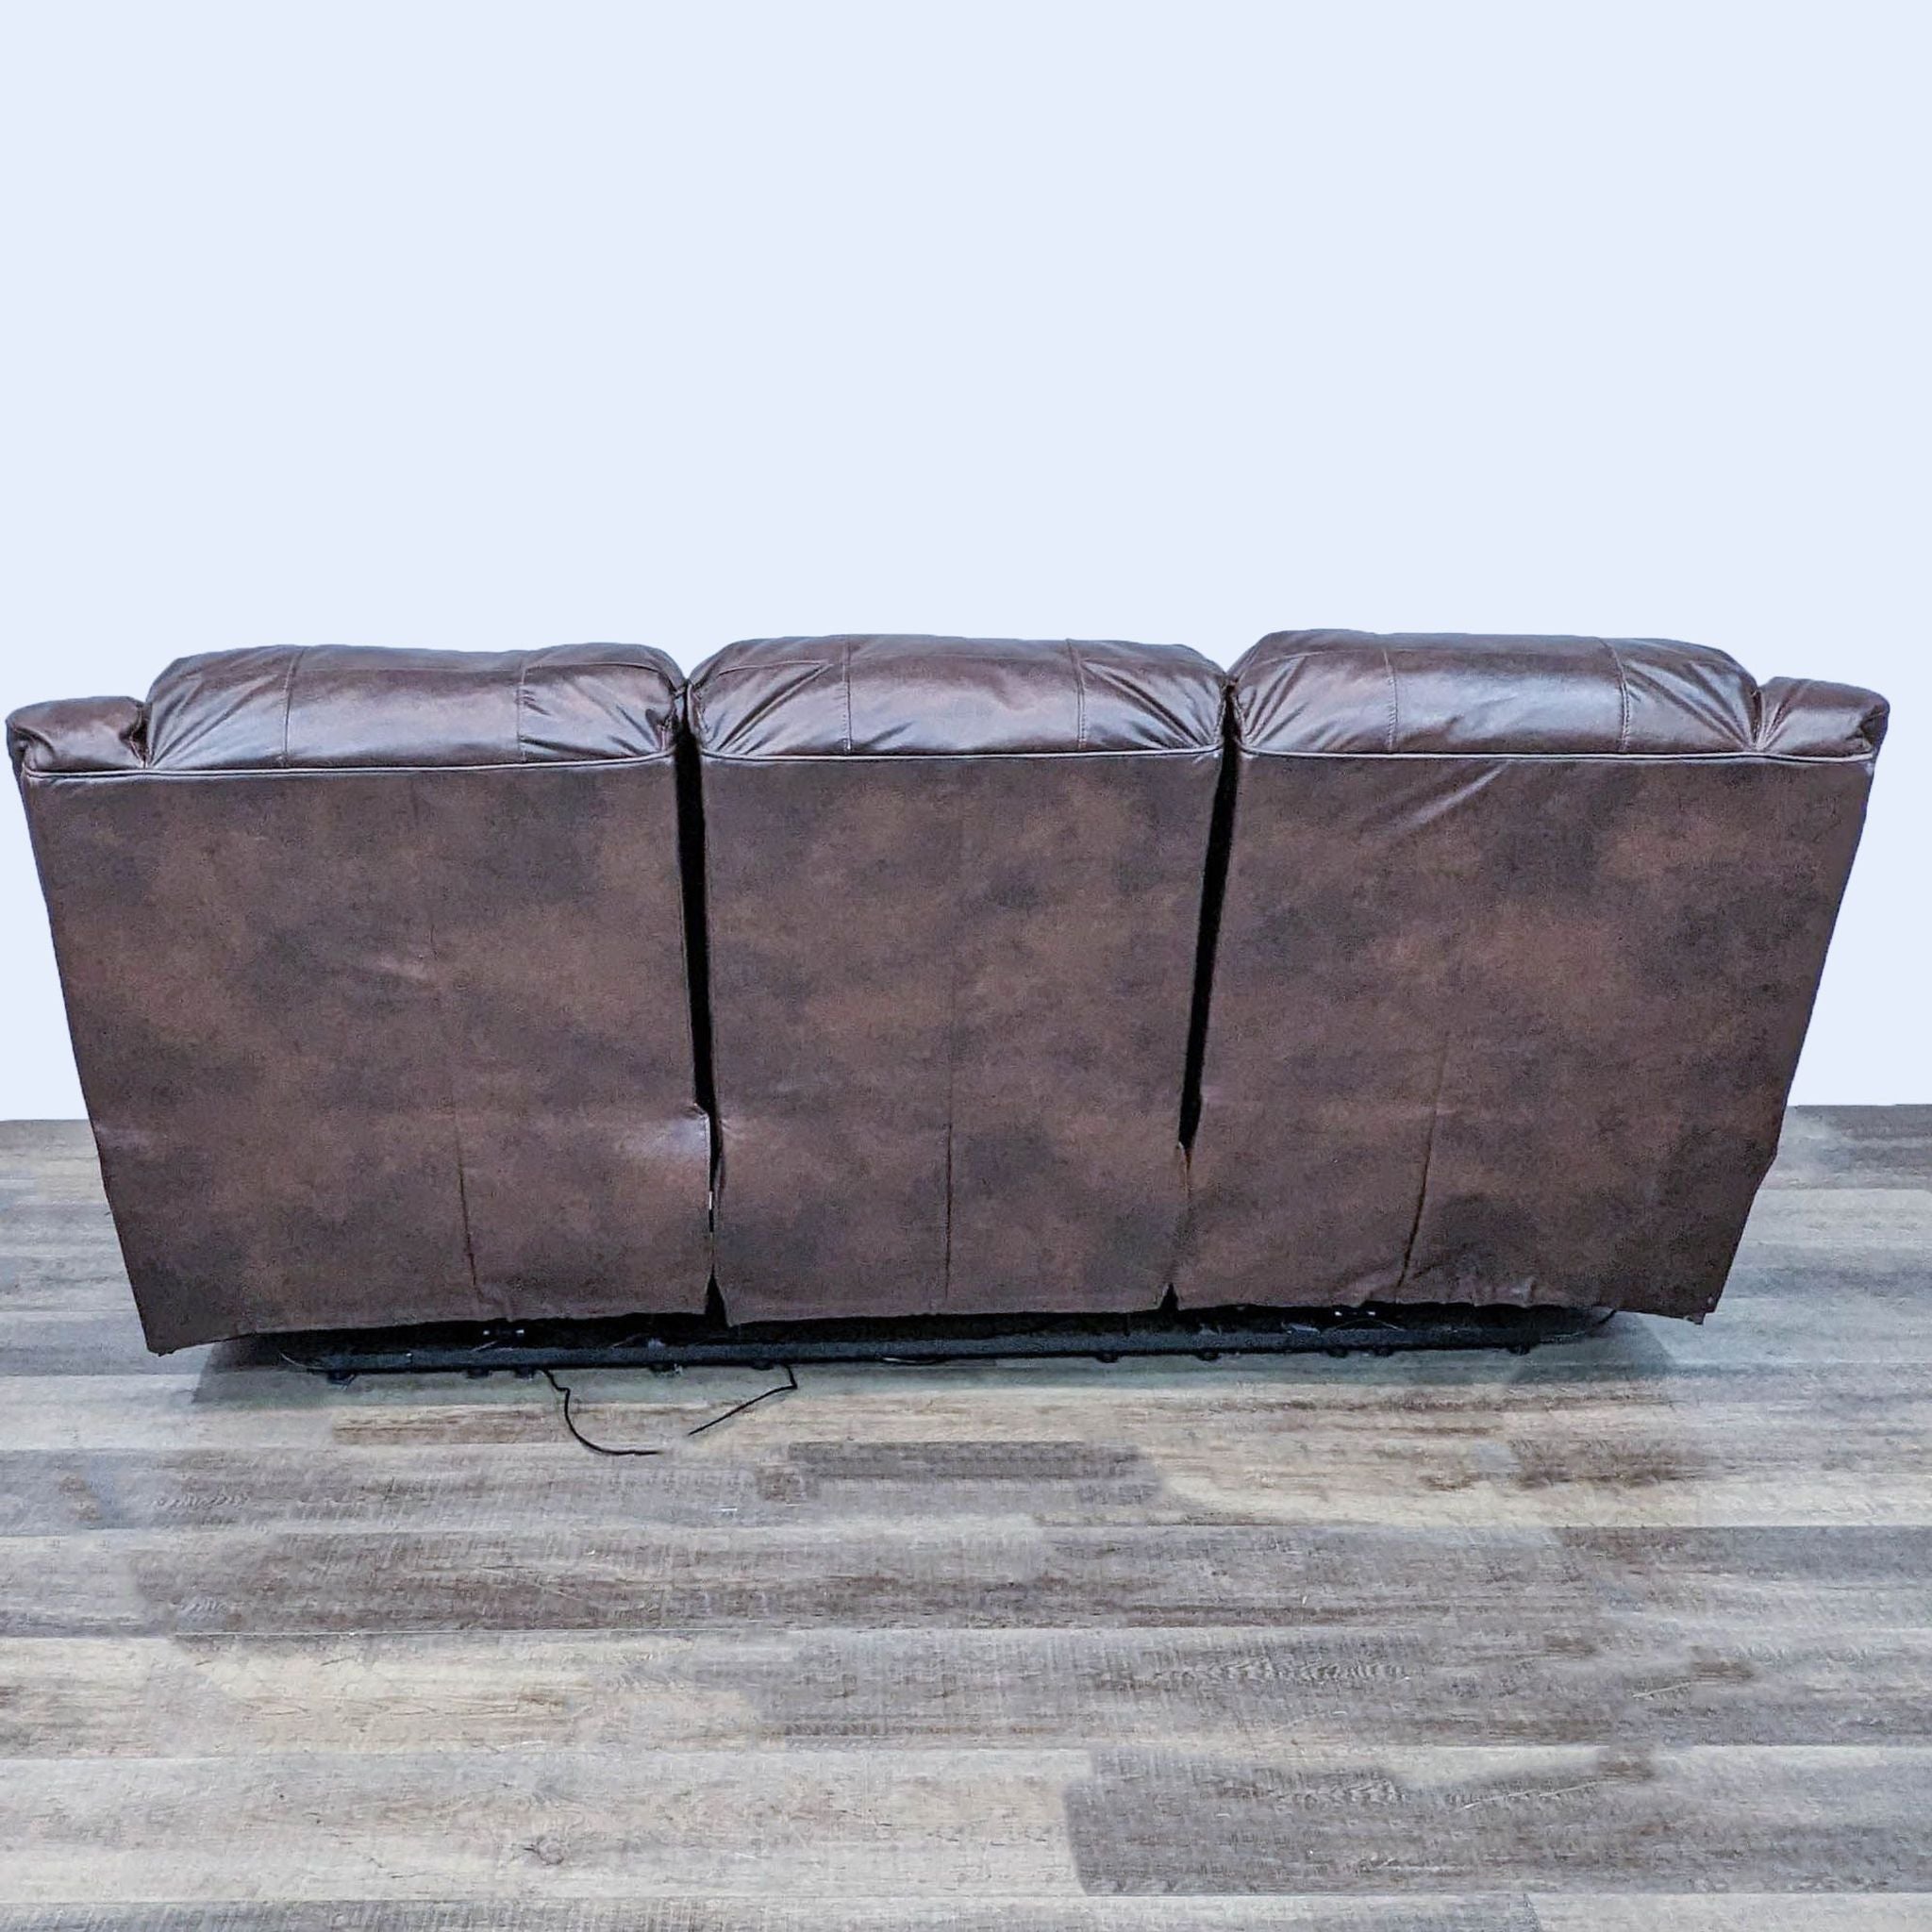 Ashley Furniture contemporary 3-seat brown leather dual reclining sofa with pillow top arms and high back.